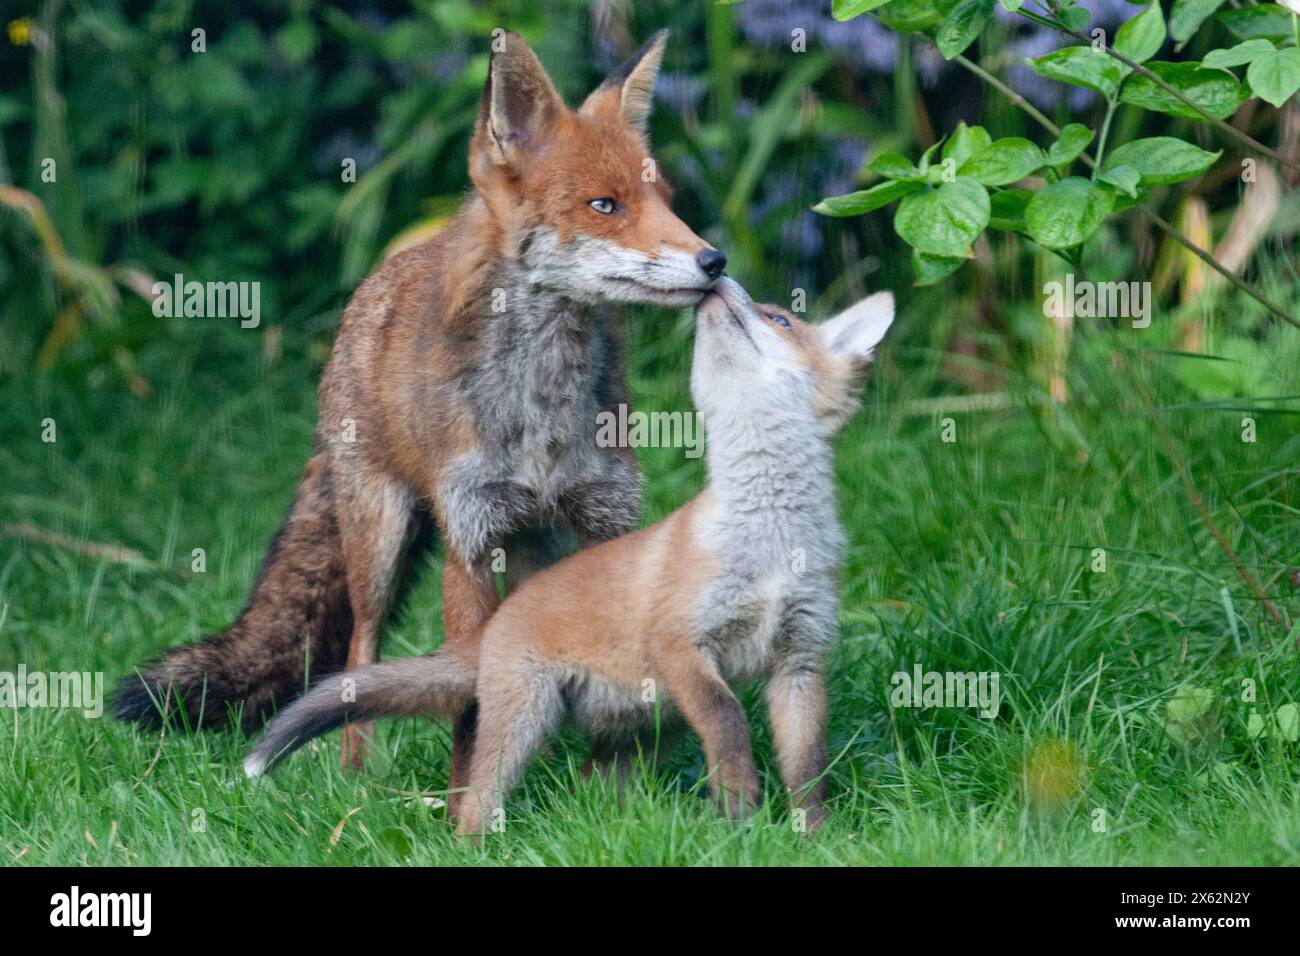 UK weather, 11 May: In a south London garden a family of foxes relax and play during the warm weather. There are five cubs in the litter. Credit: Anna Watson/Alamy Live News Stock Photo